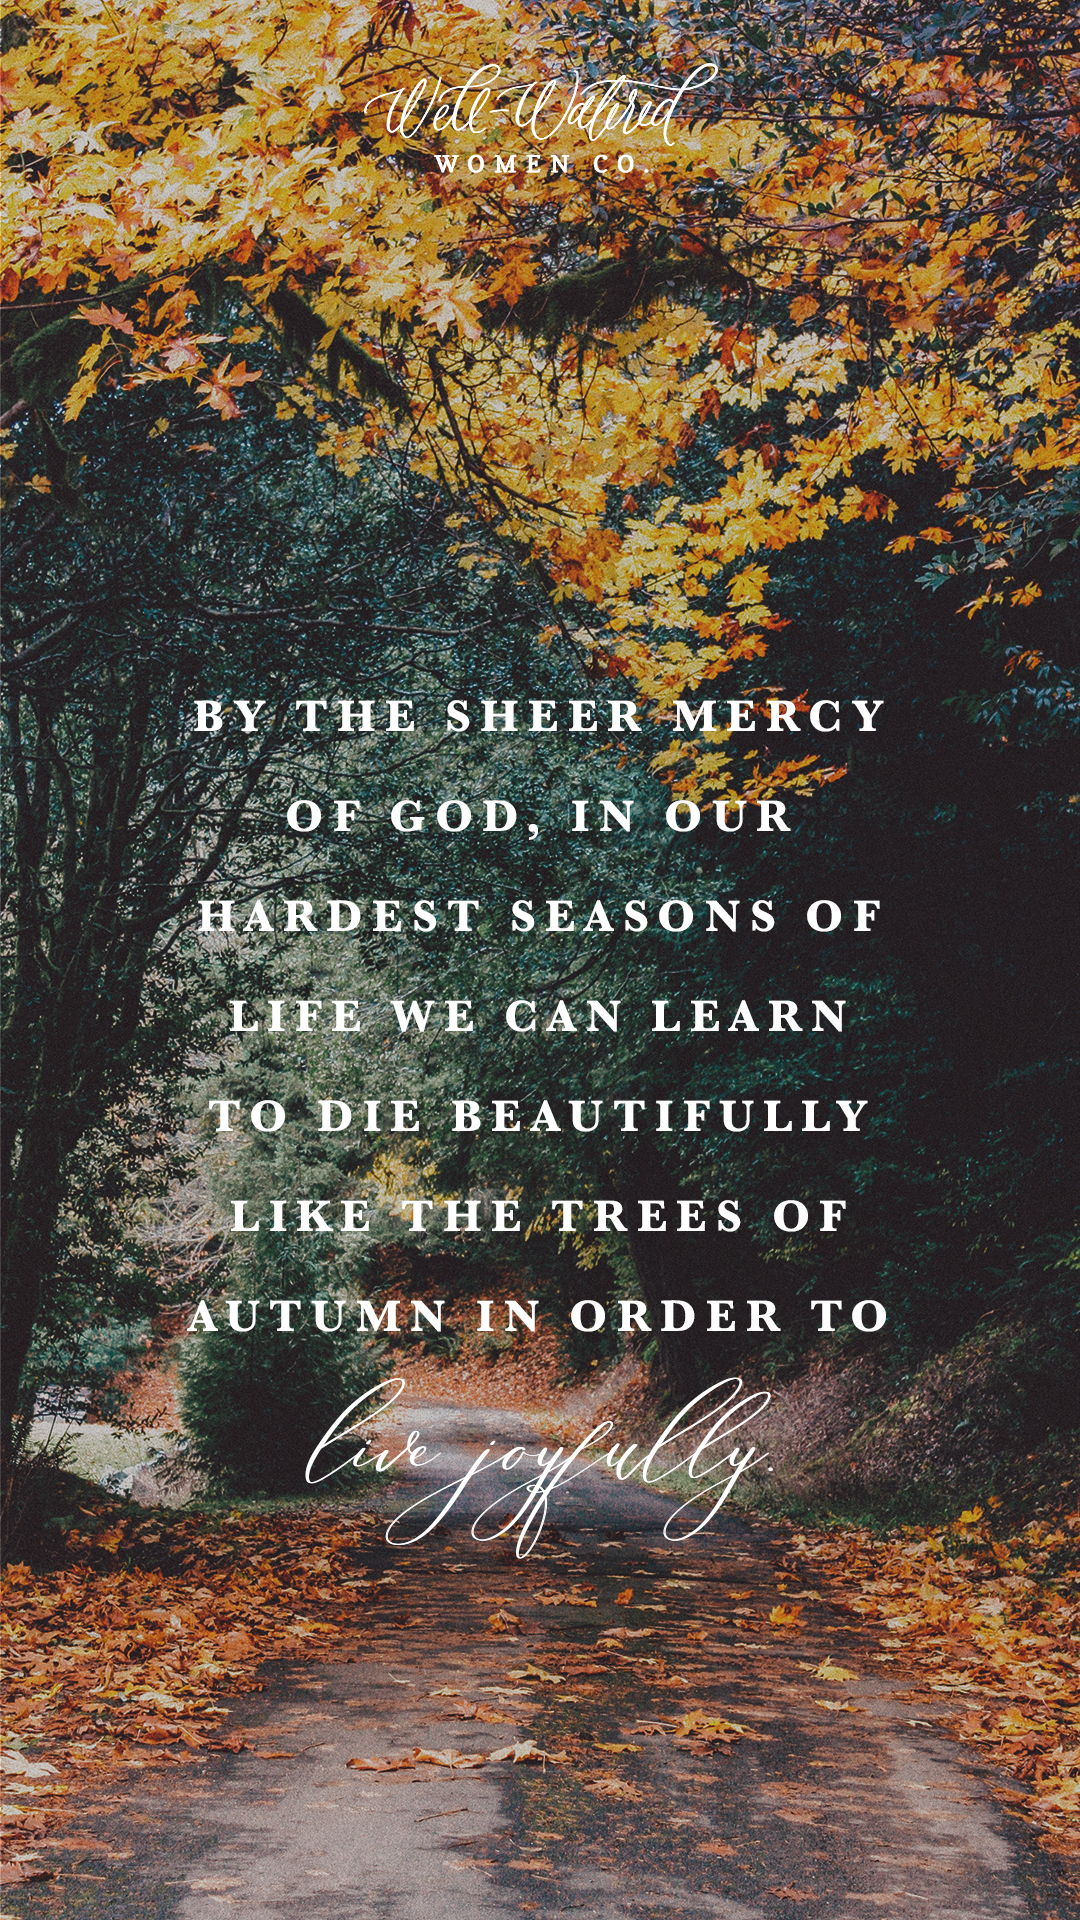 By the sheer mercy of God, in our hardest seasons of life we can learn to die beautifully like the trees of autumn in order to live joyfully.